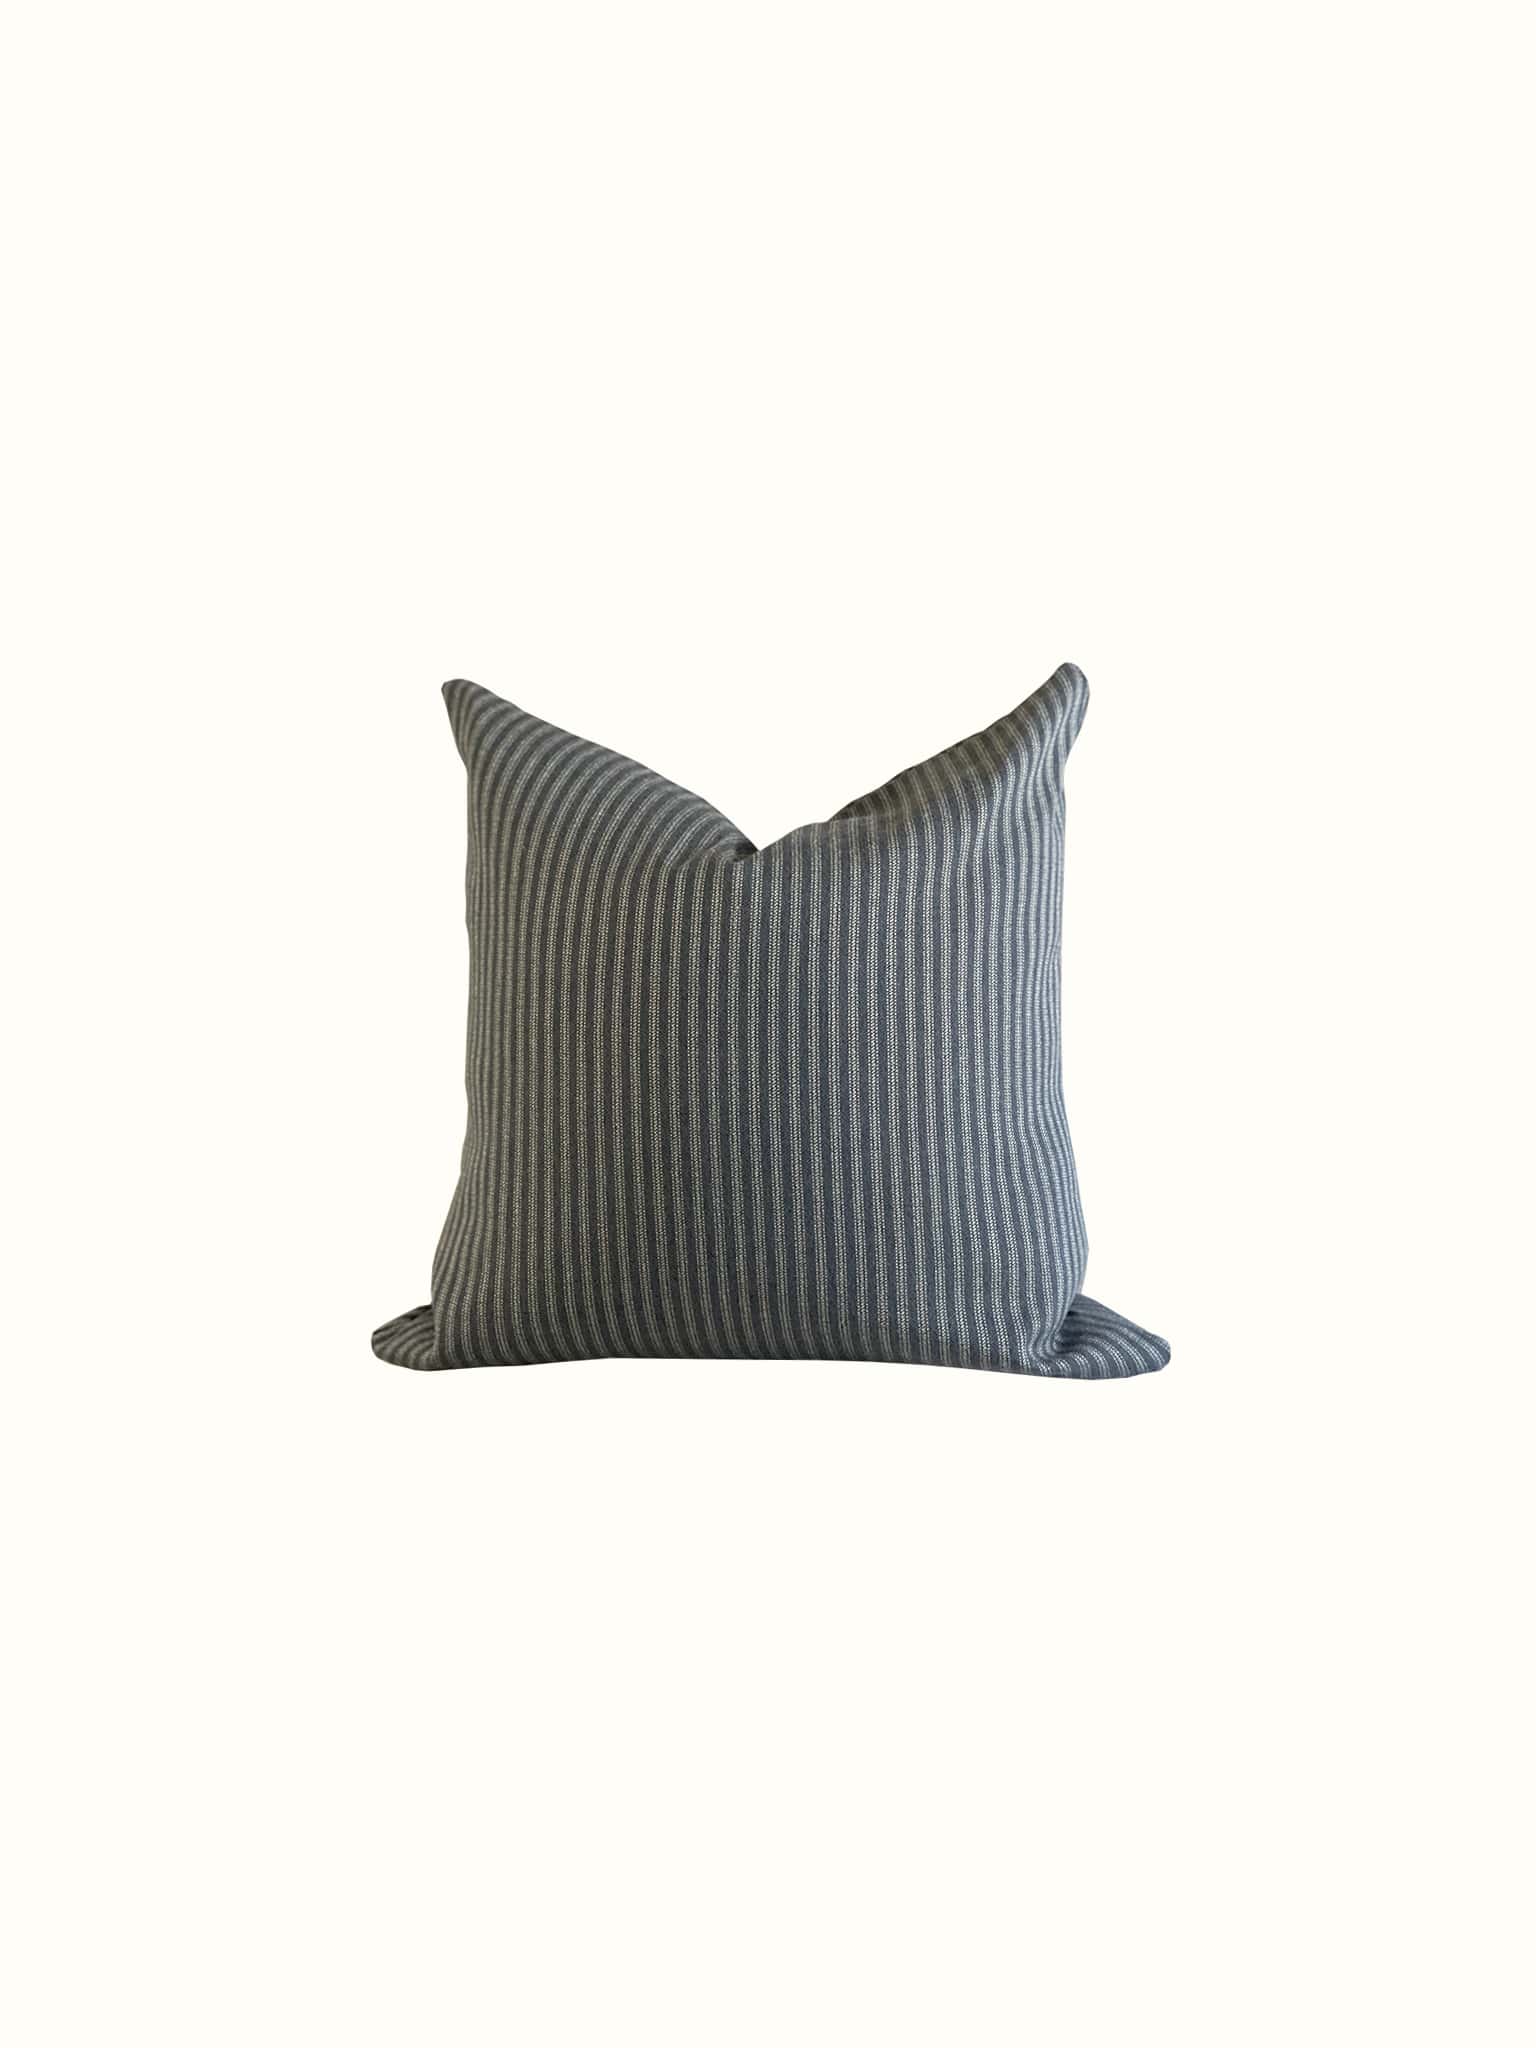 A black and dark grey looking pillow with classic ticking stripes design at Cielle Home